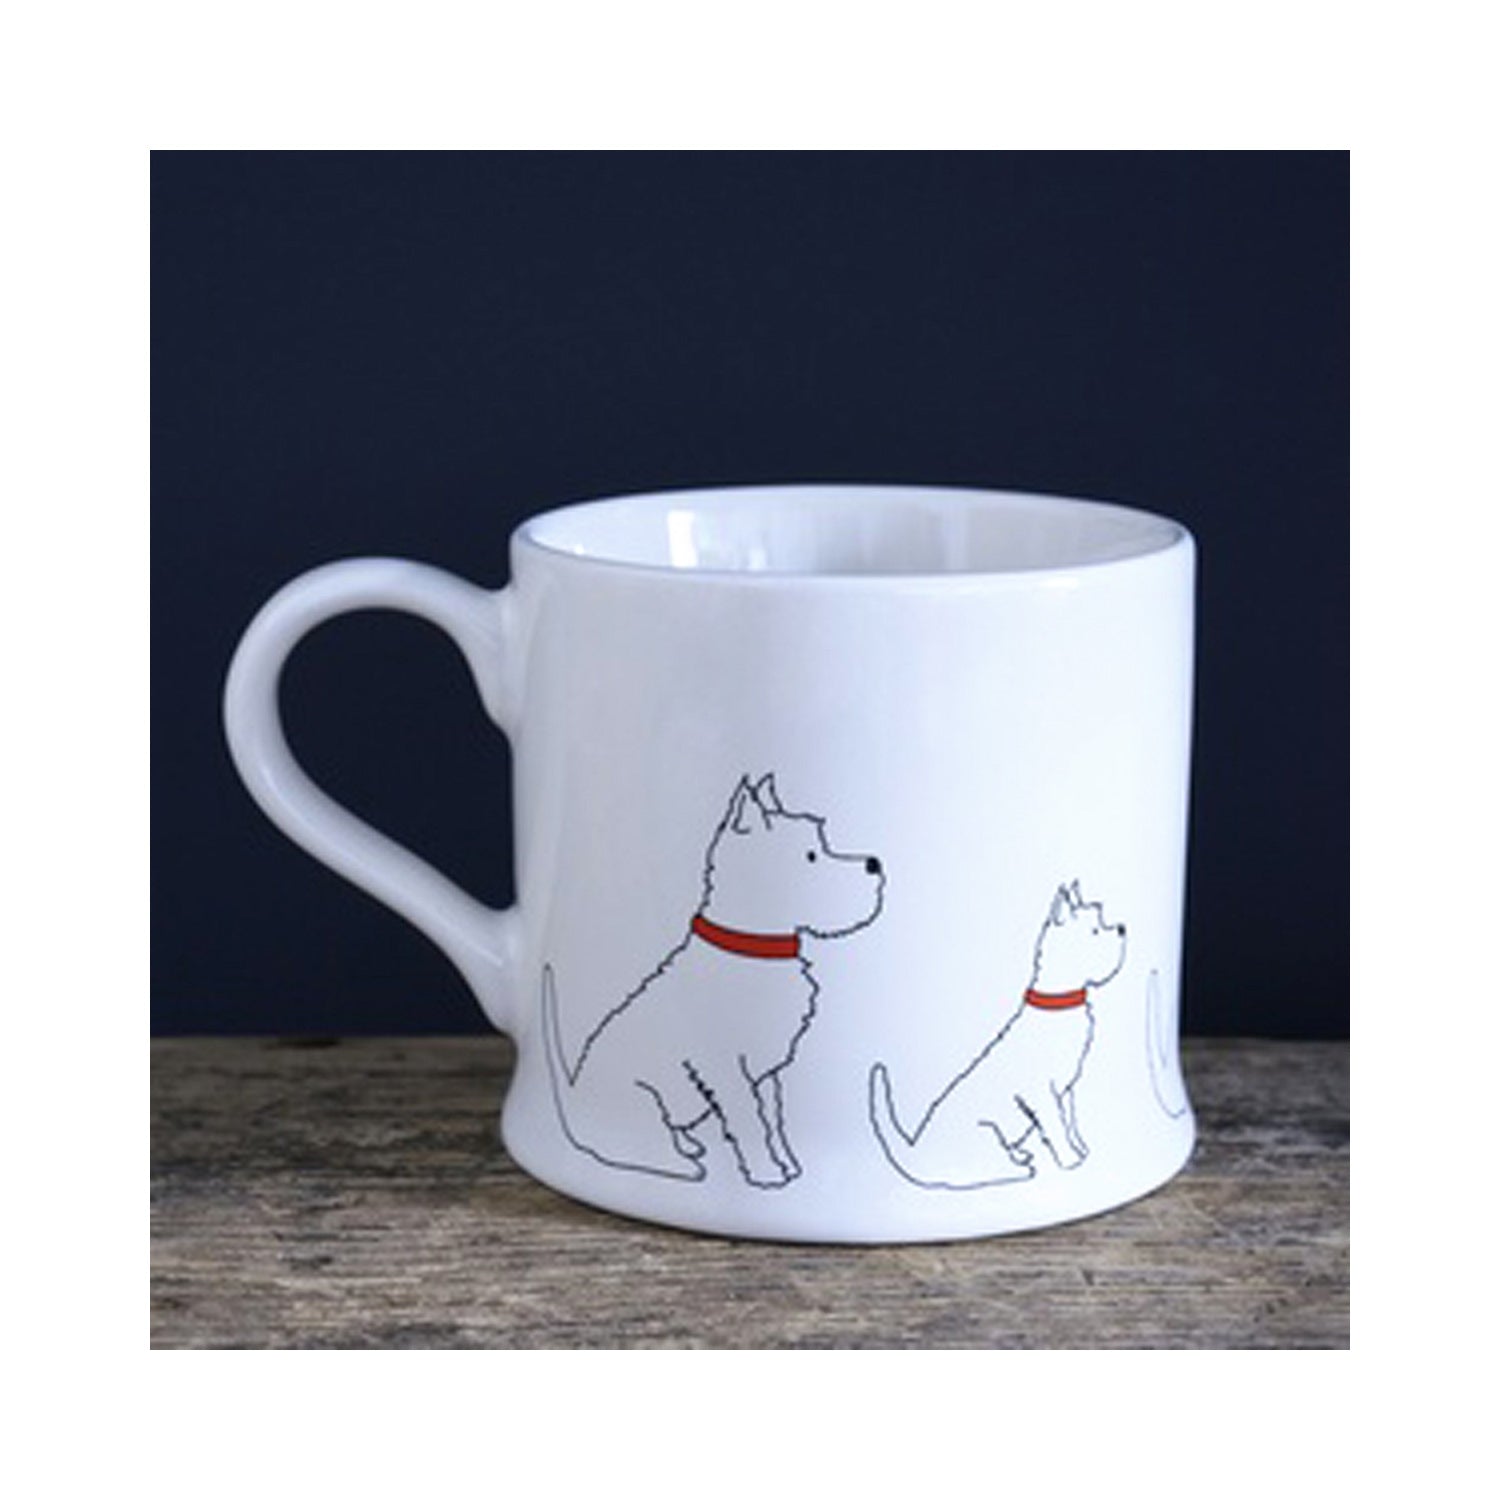 Dog Lover Gifts available at Dog Krazy Gifts - Frank the West Highland Terrier Mug - part of the Sweet William range available from Dog Krazy Gifts